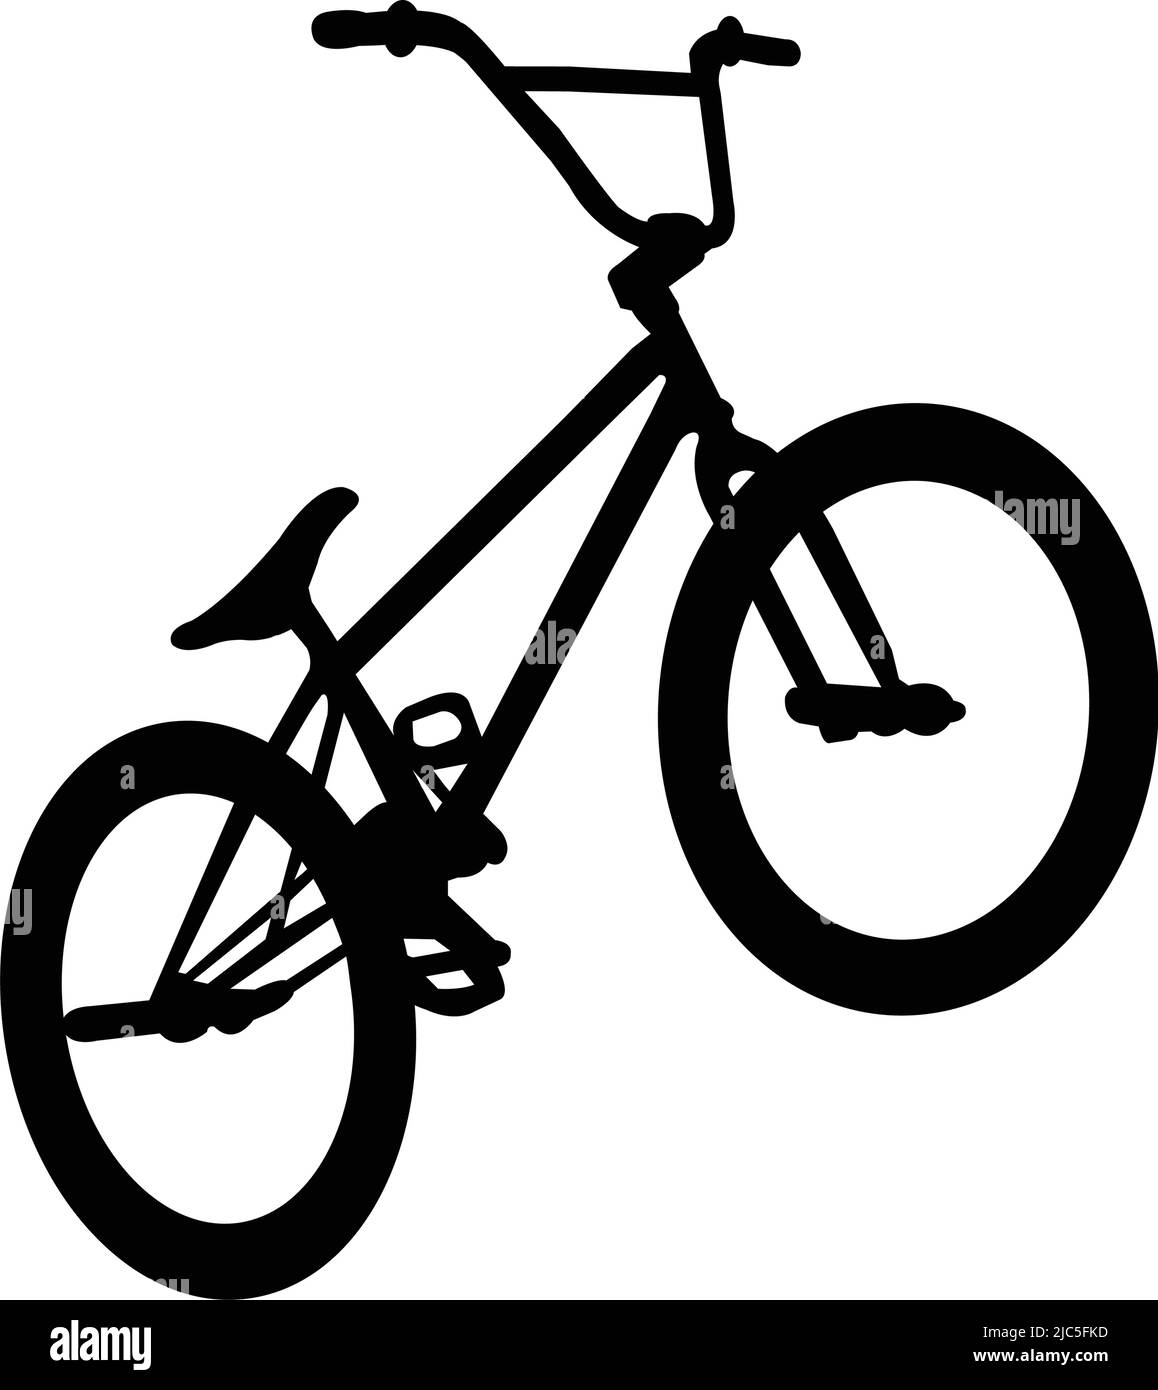 Bmx bicycle Black and White Stock Photos & Images - Alamy